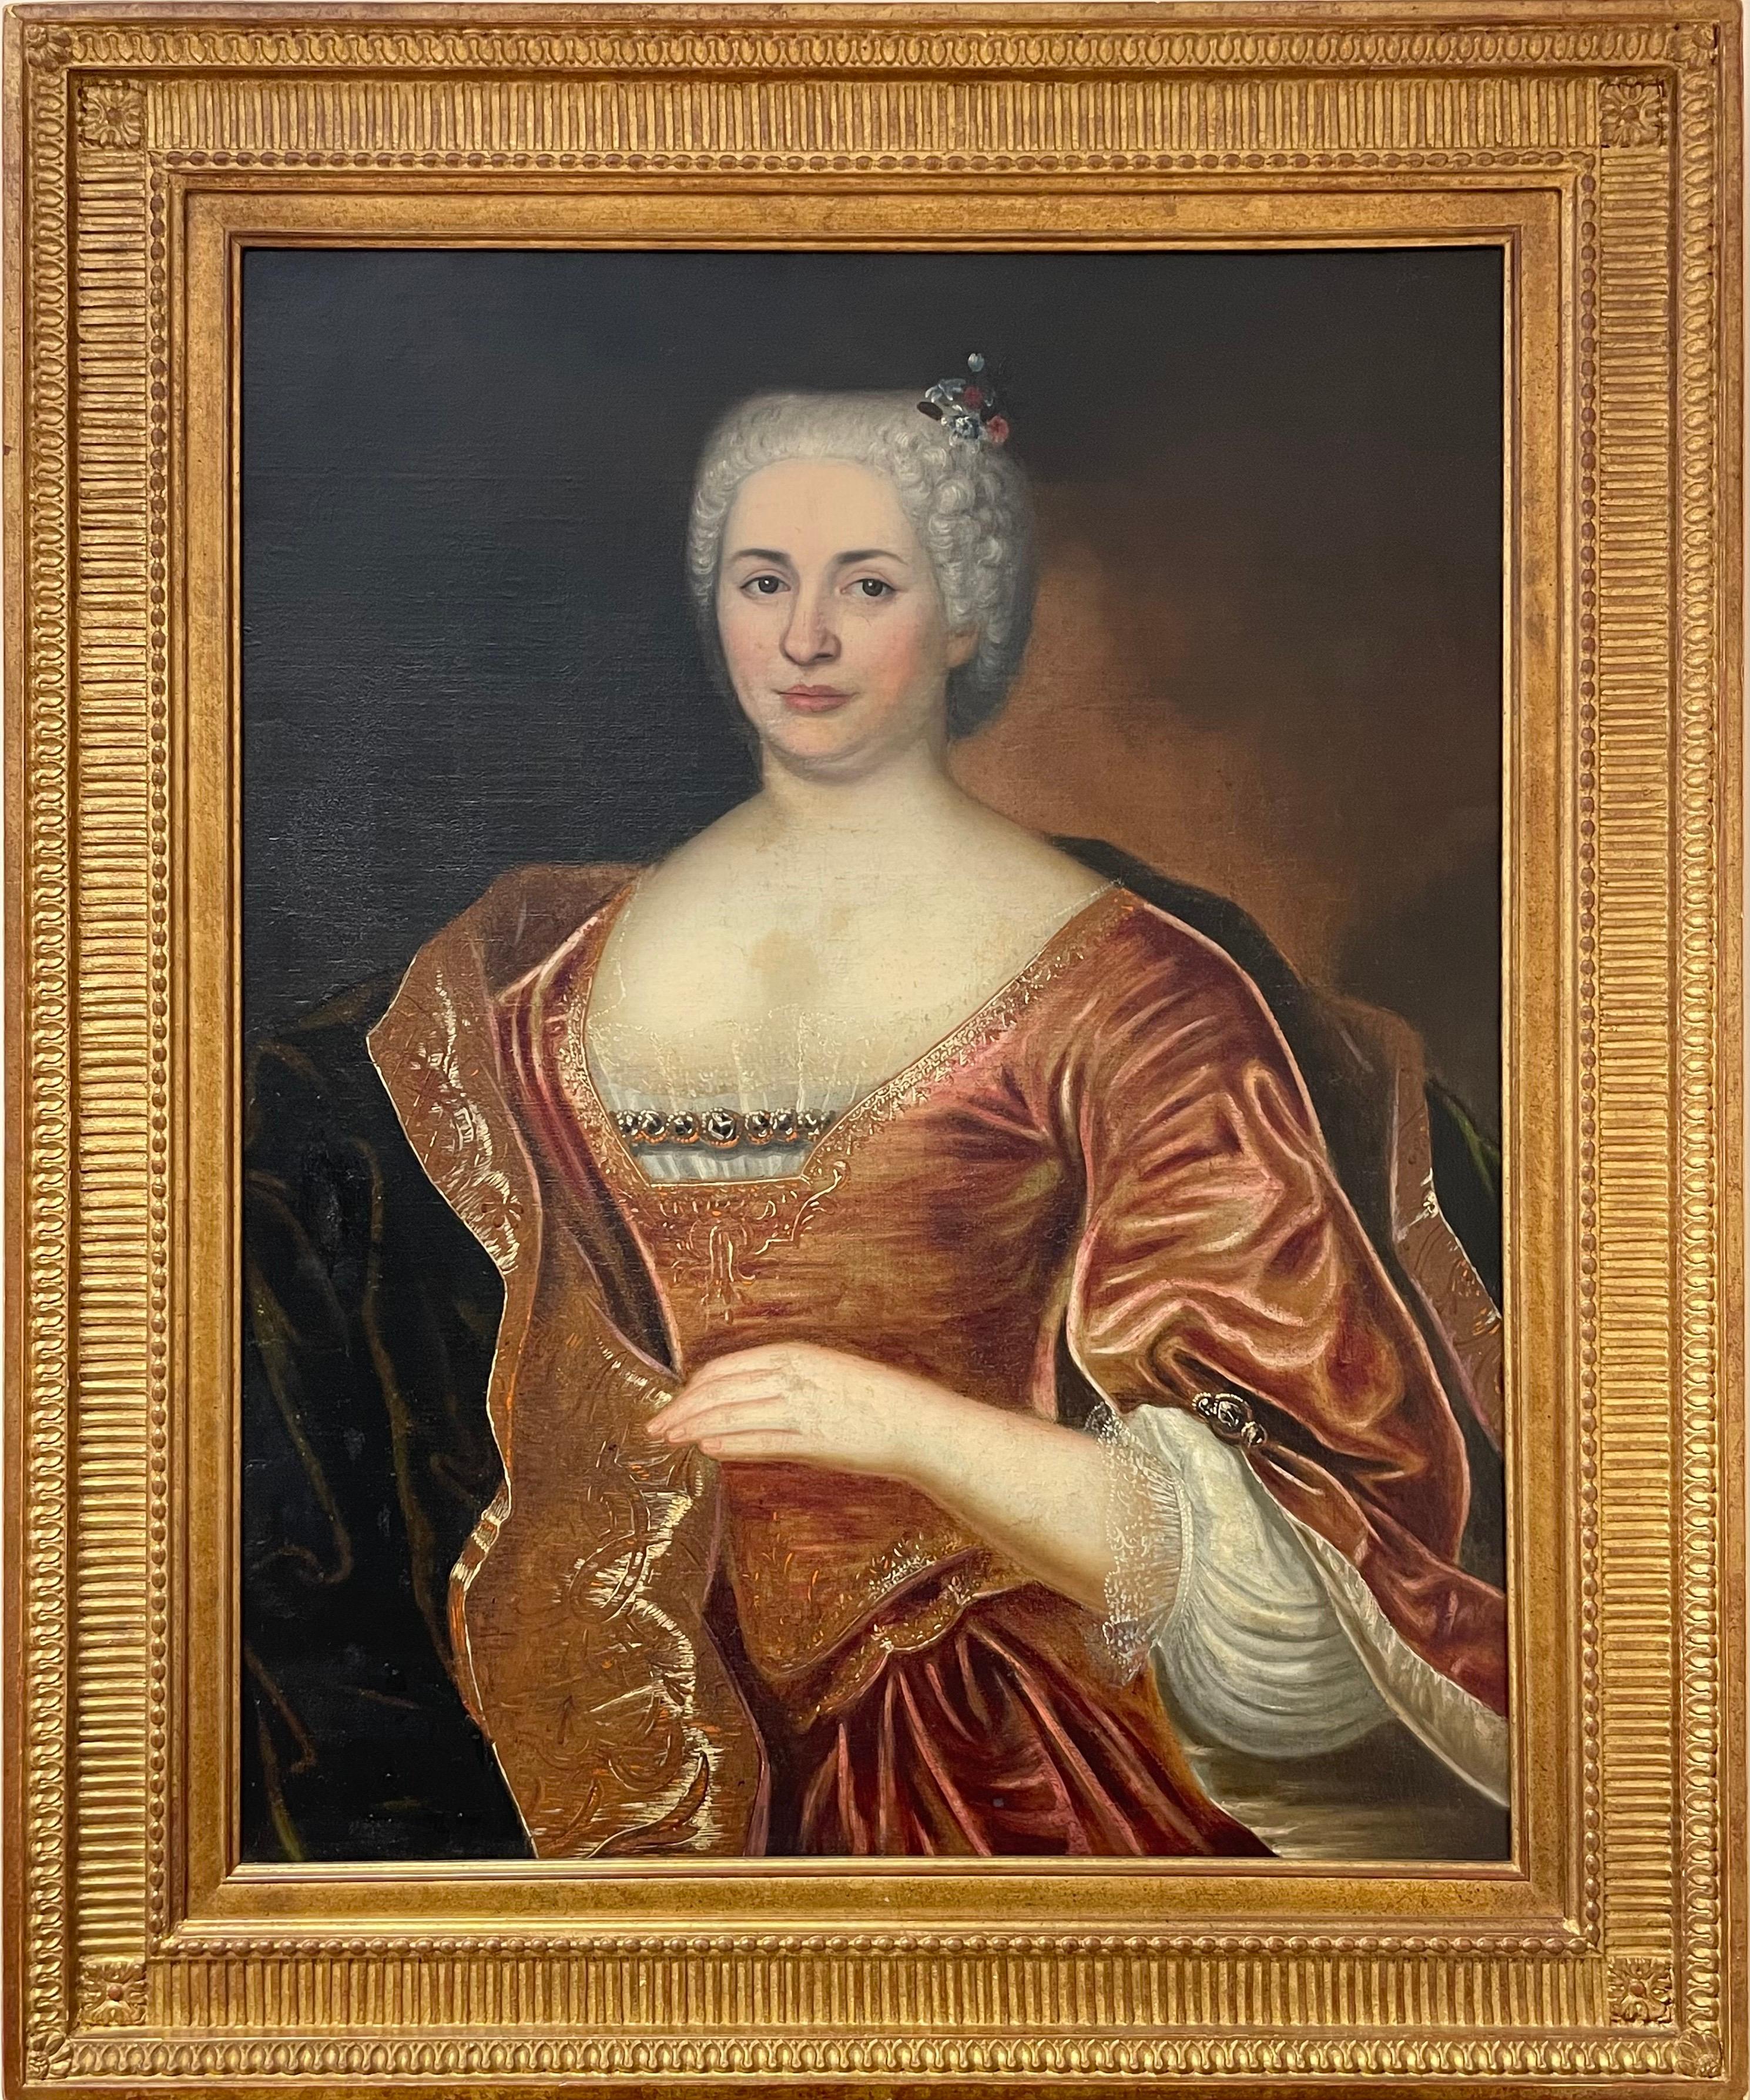 1700's French Master Figurative Painting - Fine 1700's French Old Master Oil Portrait of Aristocratic Lady in Silk Dress